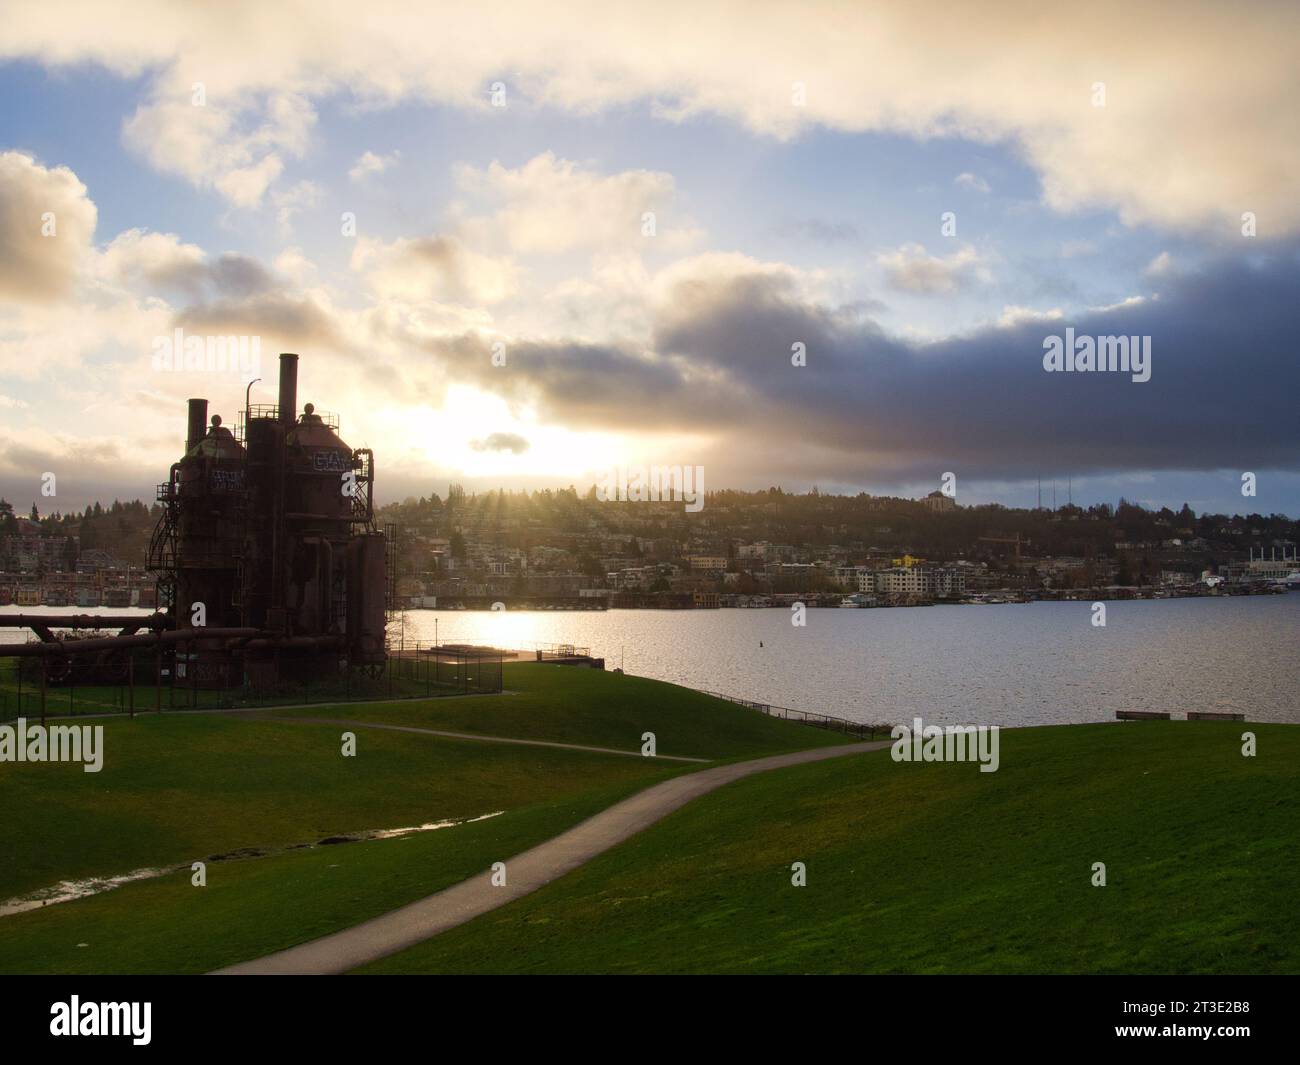 Early morning sunrise over gas plant in industrial Gas Works Park in Seattle, WA. View of Eastlake neighborhood. Abandoned, historic site. Stock Photo